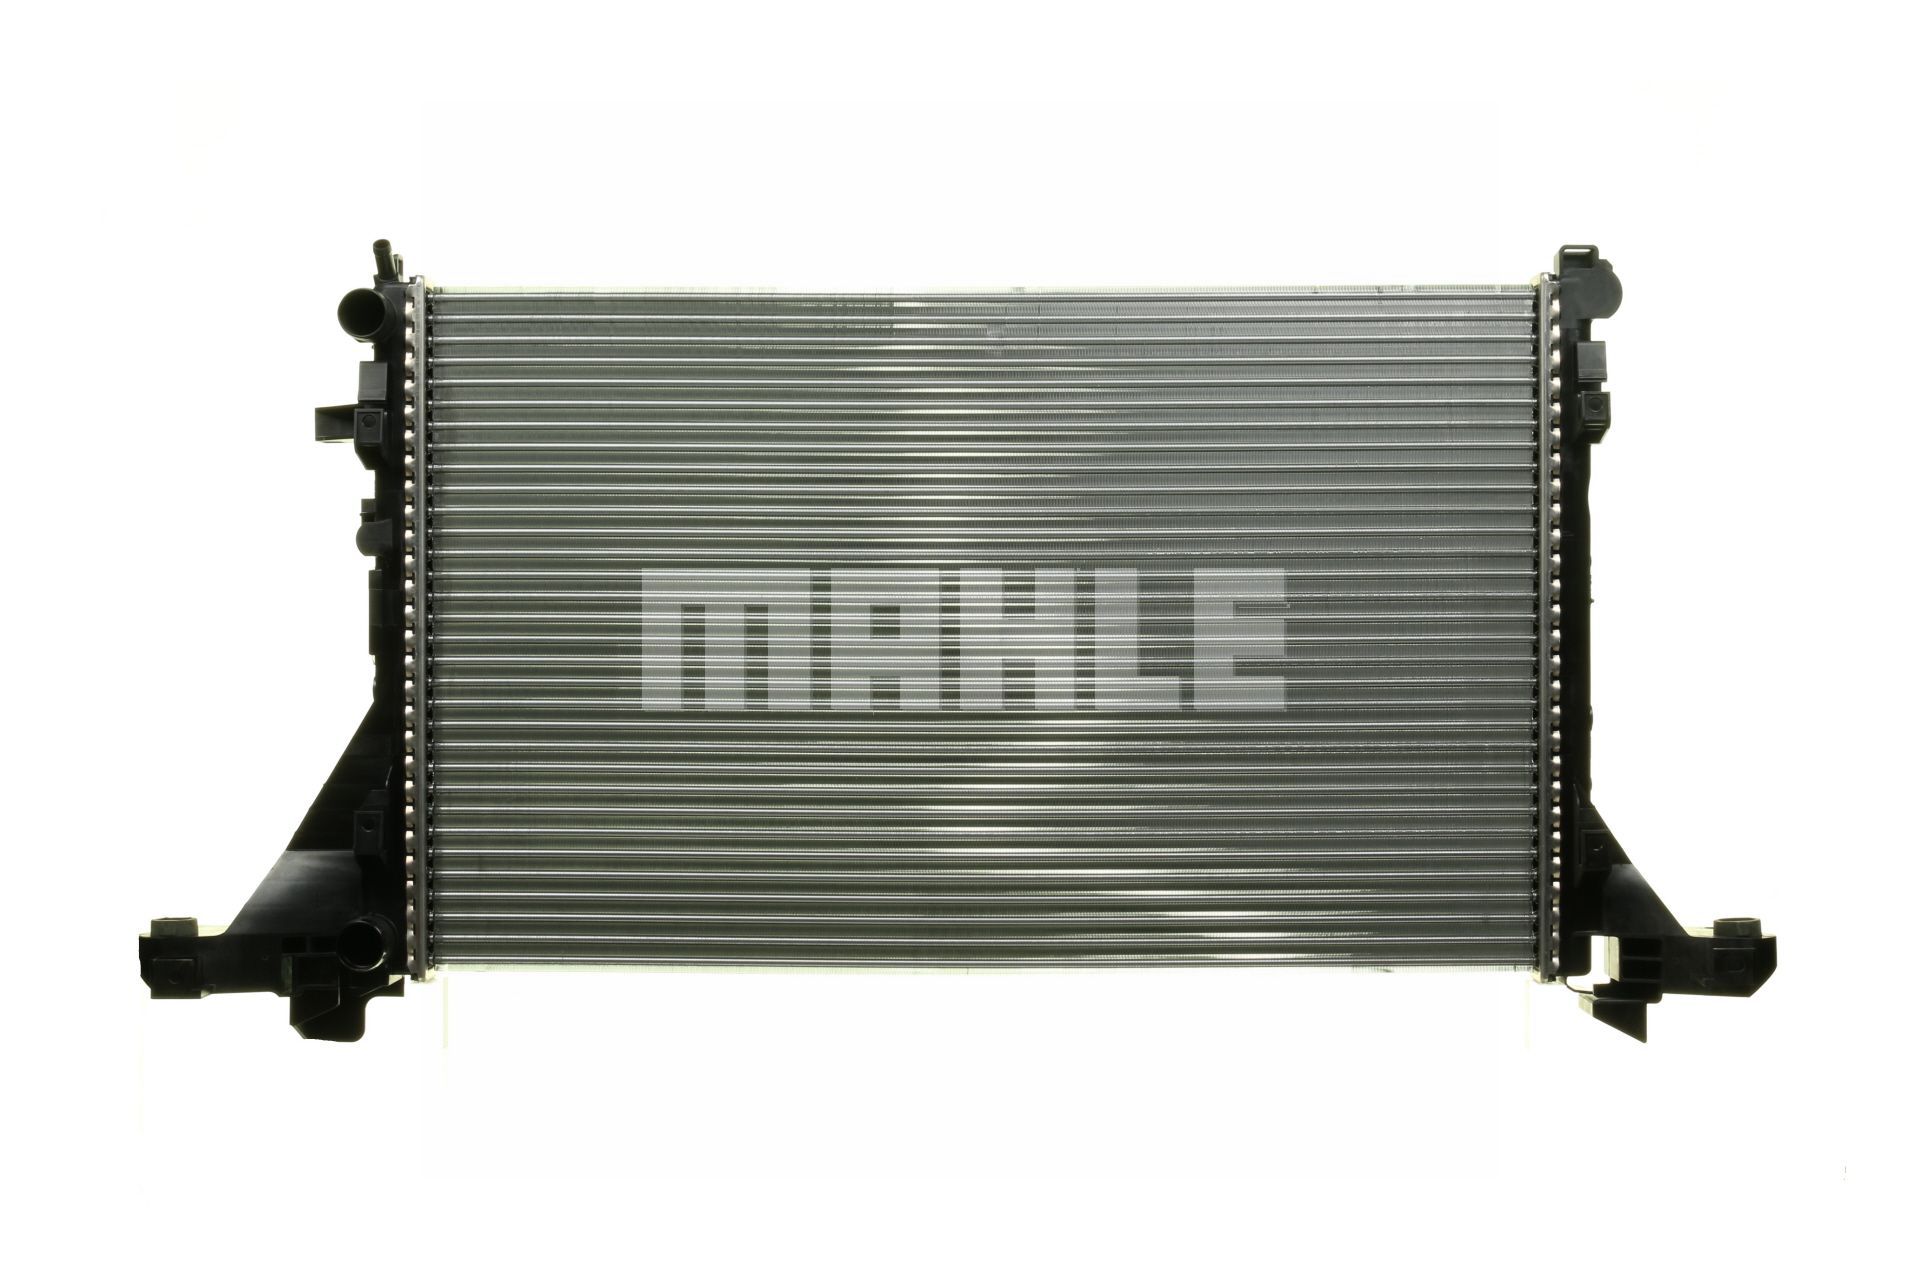 376787431 MAHLE ORIGINAL for vehicles without air conditioning, 776 x 480 x 26 mm, Mechanically jointed cooling fins Radiator CR 1771 000P buy